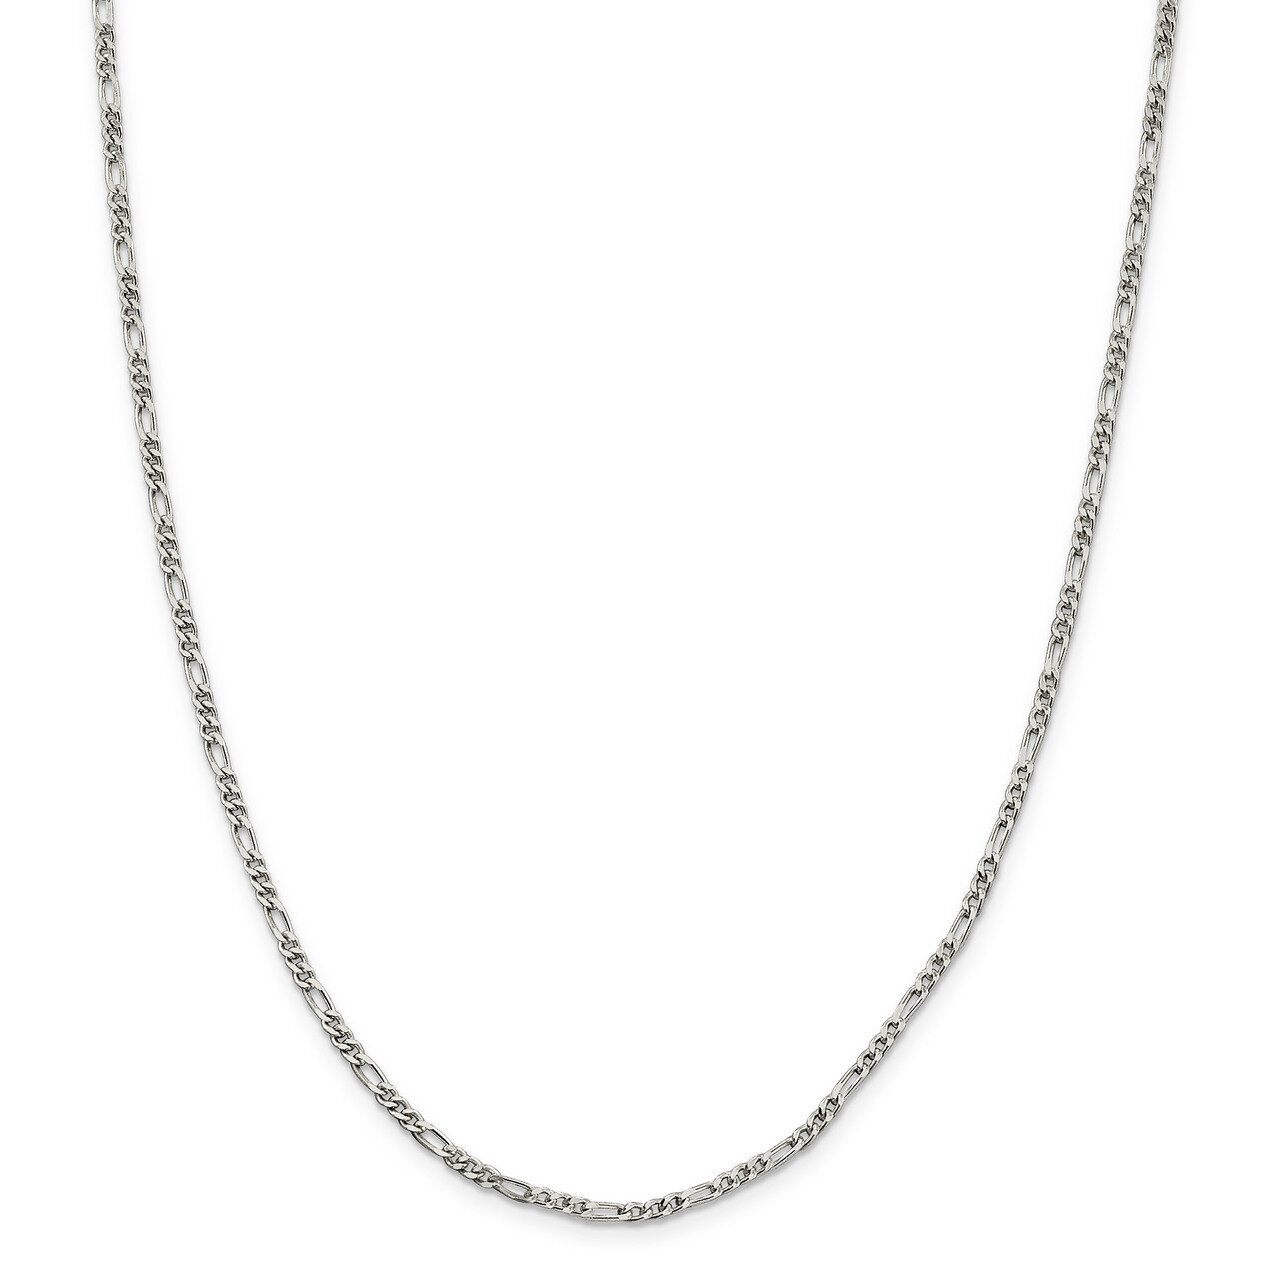 10 Inch 2.5mm Figaro Chain Sterling Silver QFG070-10